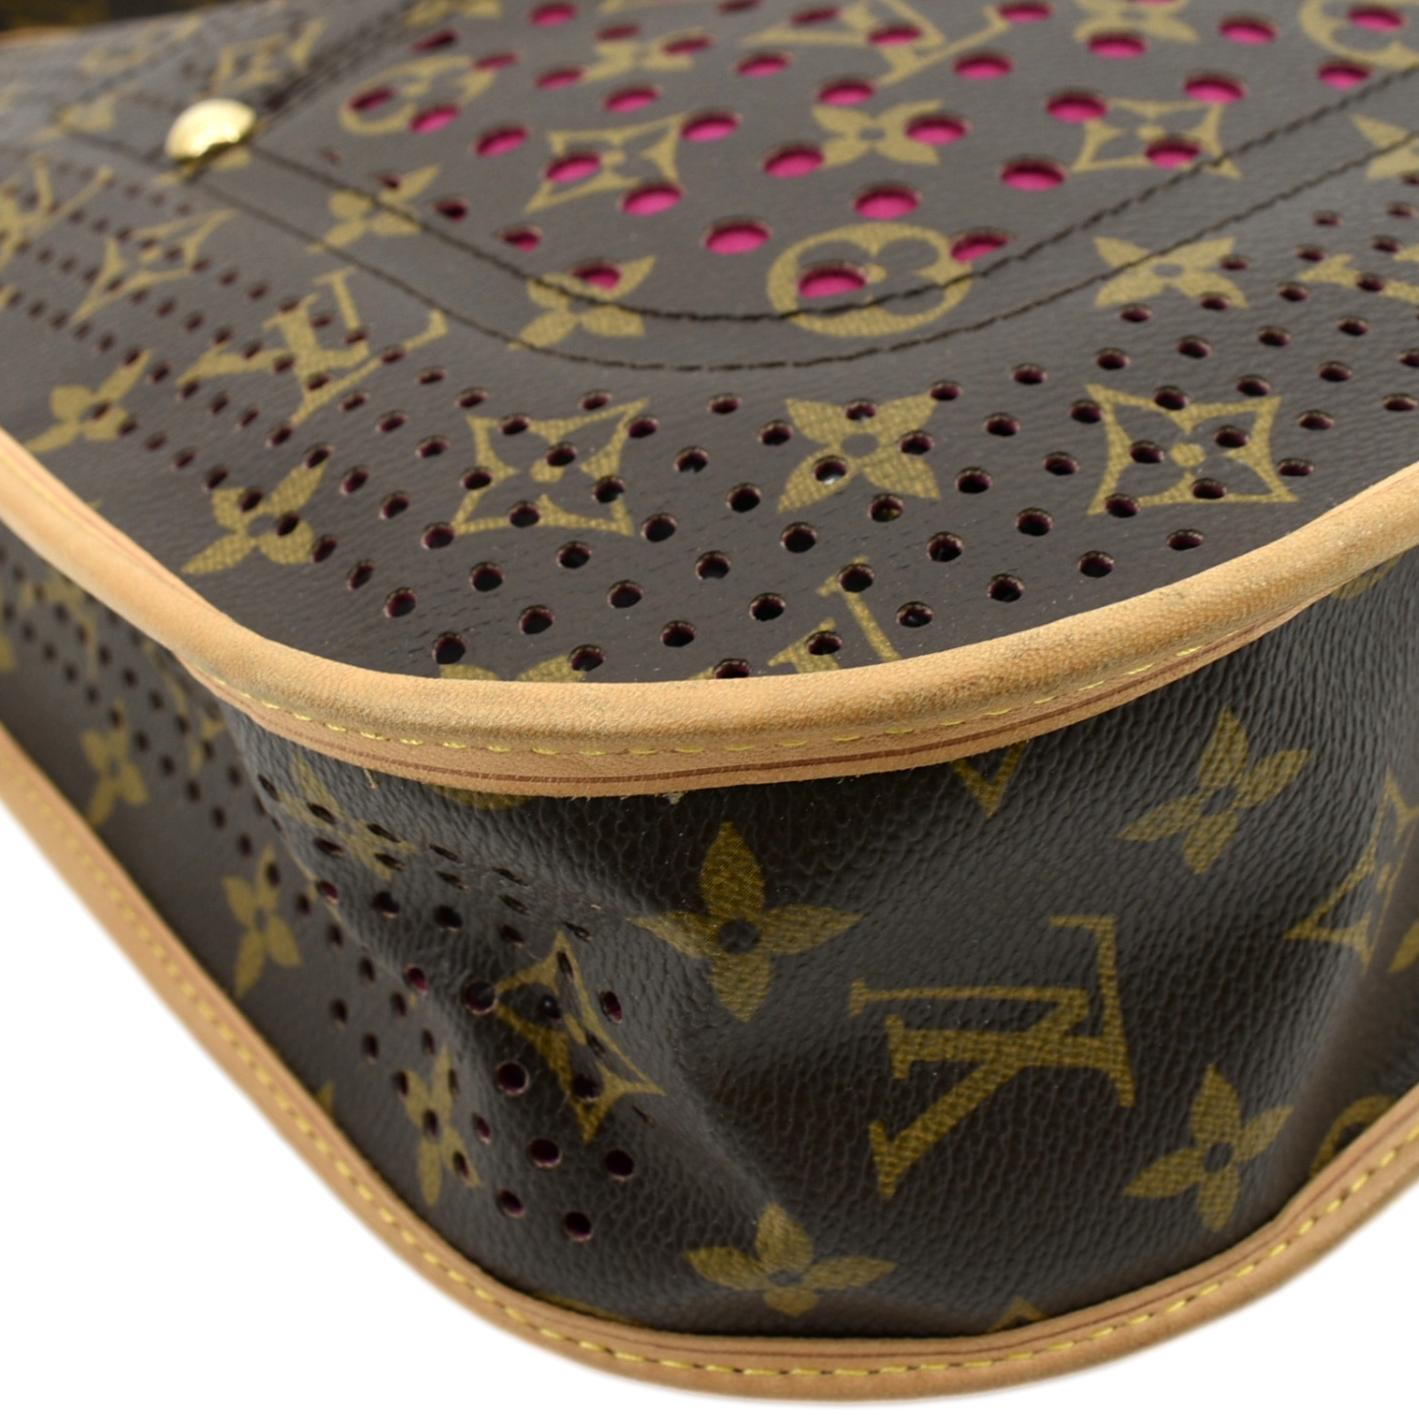 Sold at Auction: LOUIS VUITTON Schultertasche PERFORATED MUSETTE